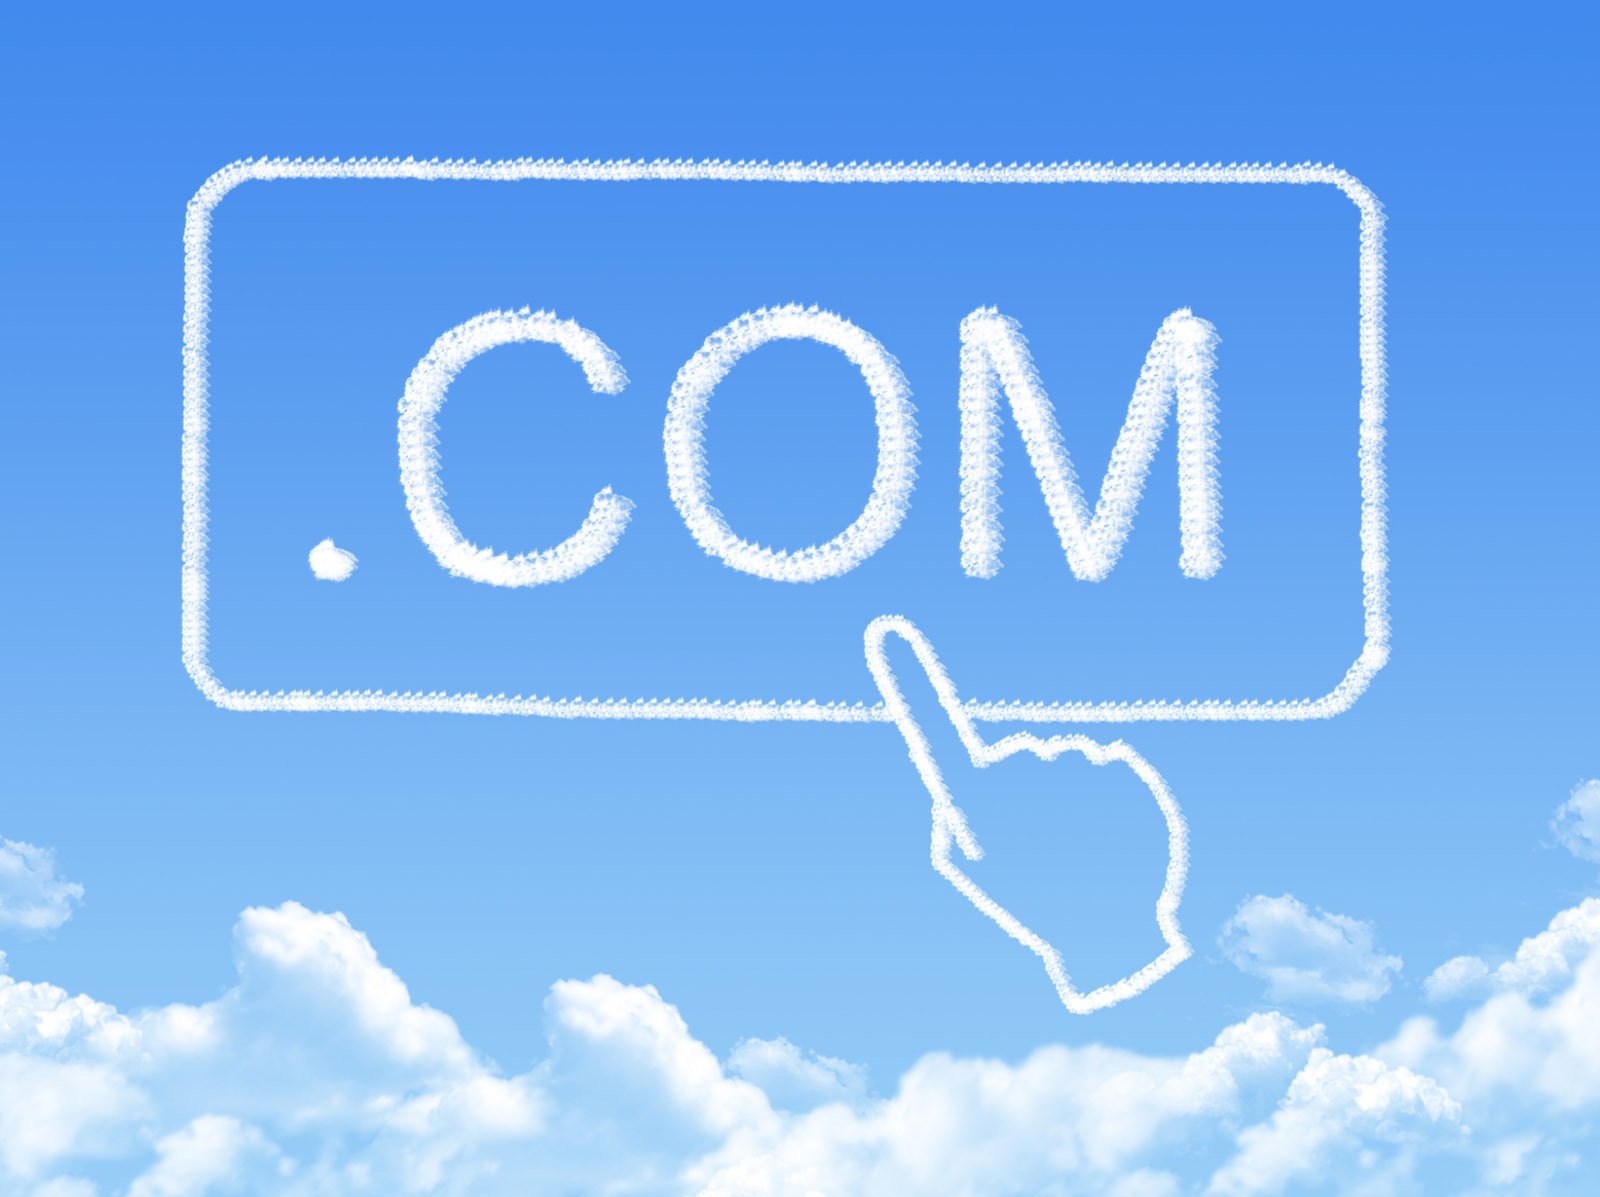 Reston’s Verisign cleared to raise price for .com domain registrations